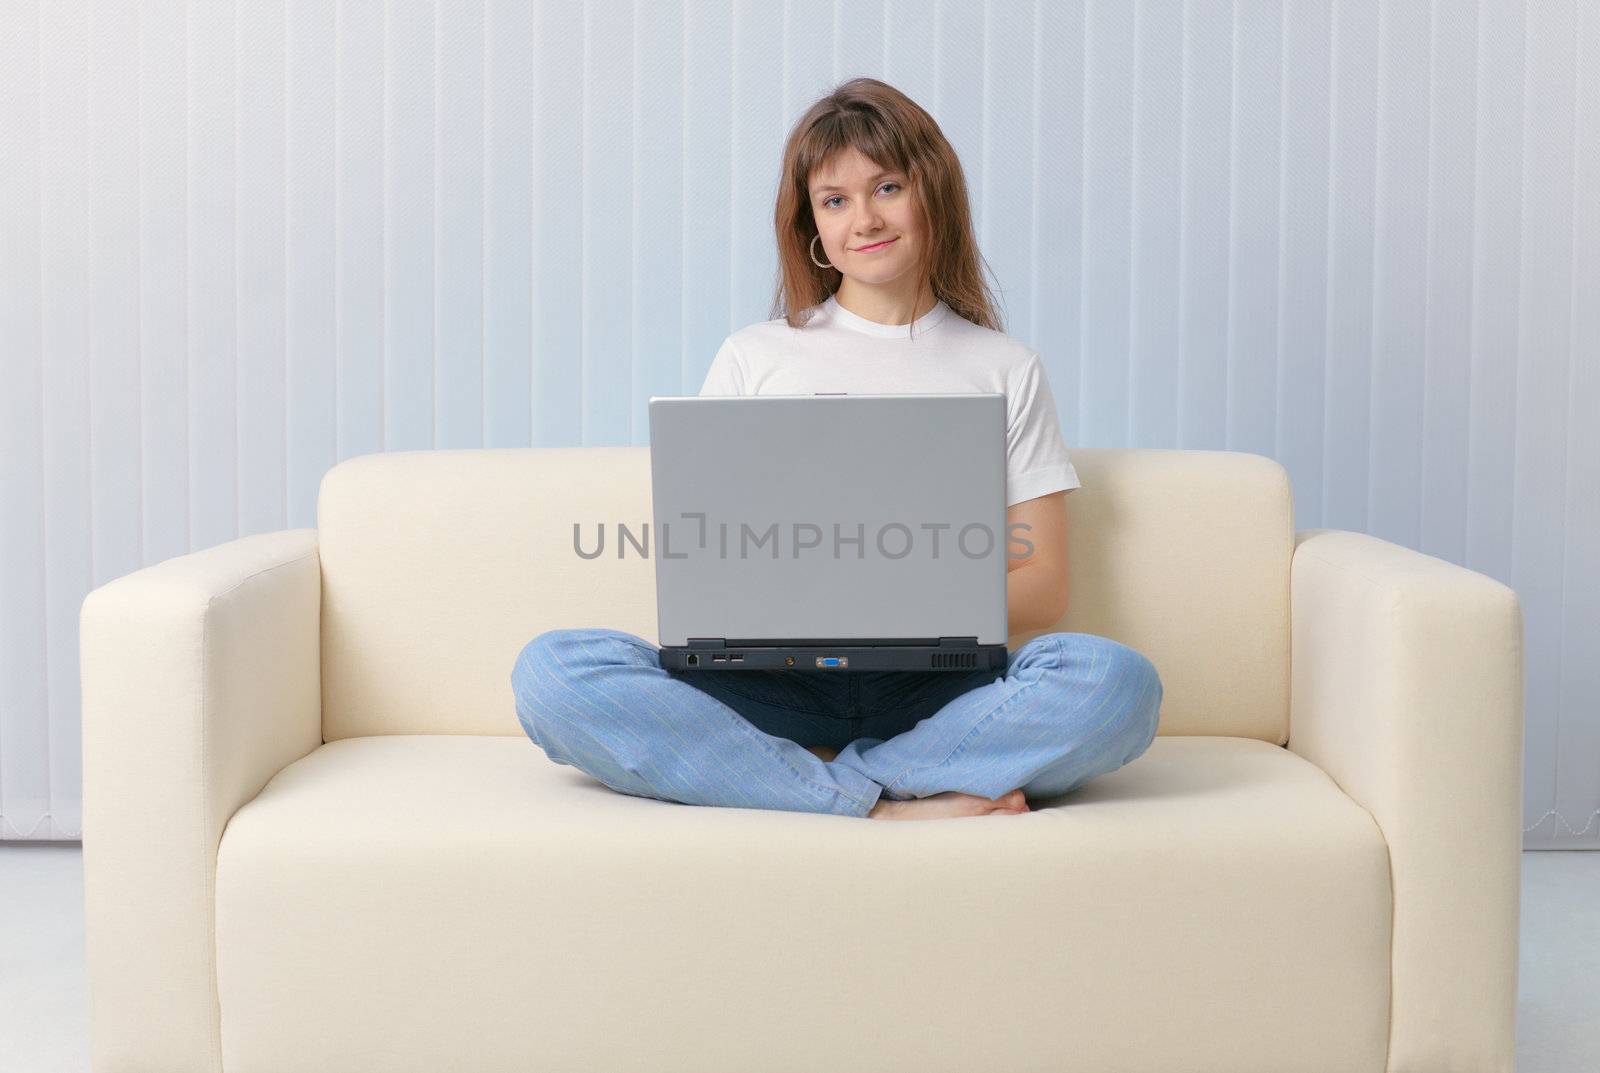 The girl sitting on the couch with a laptop